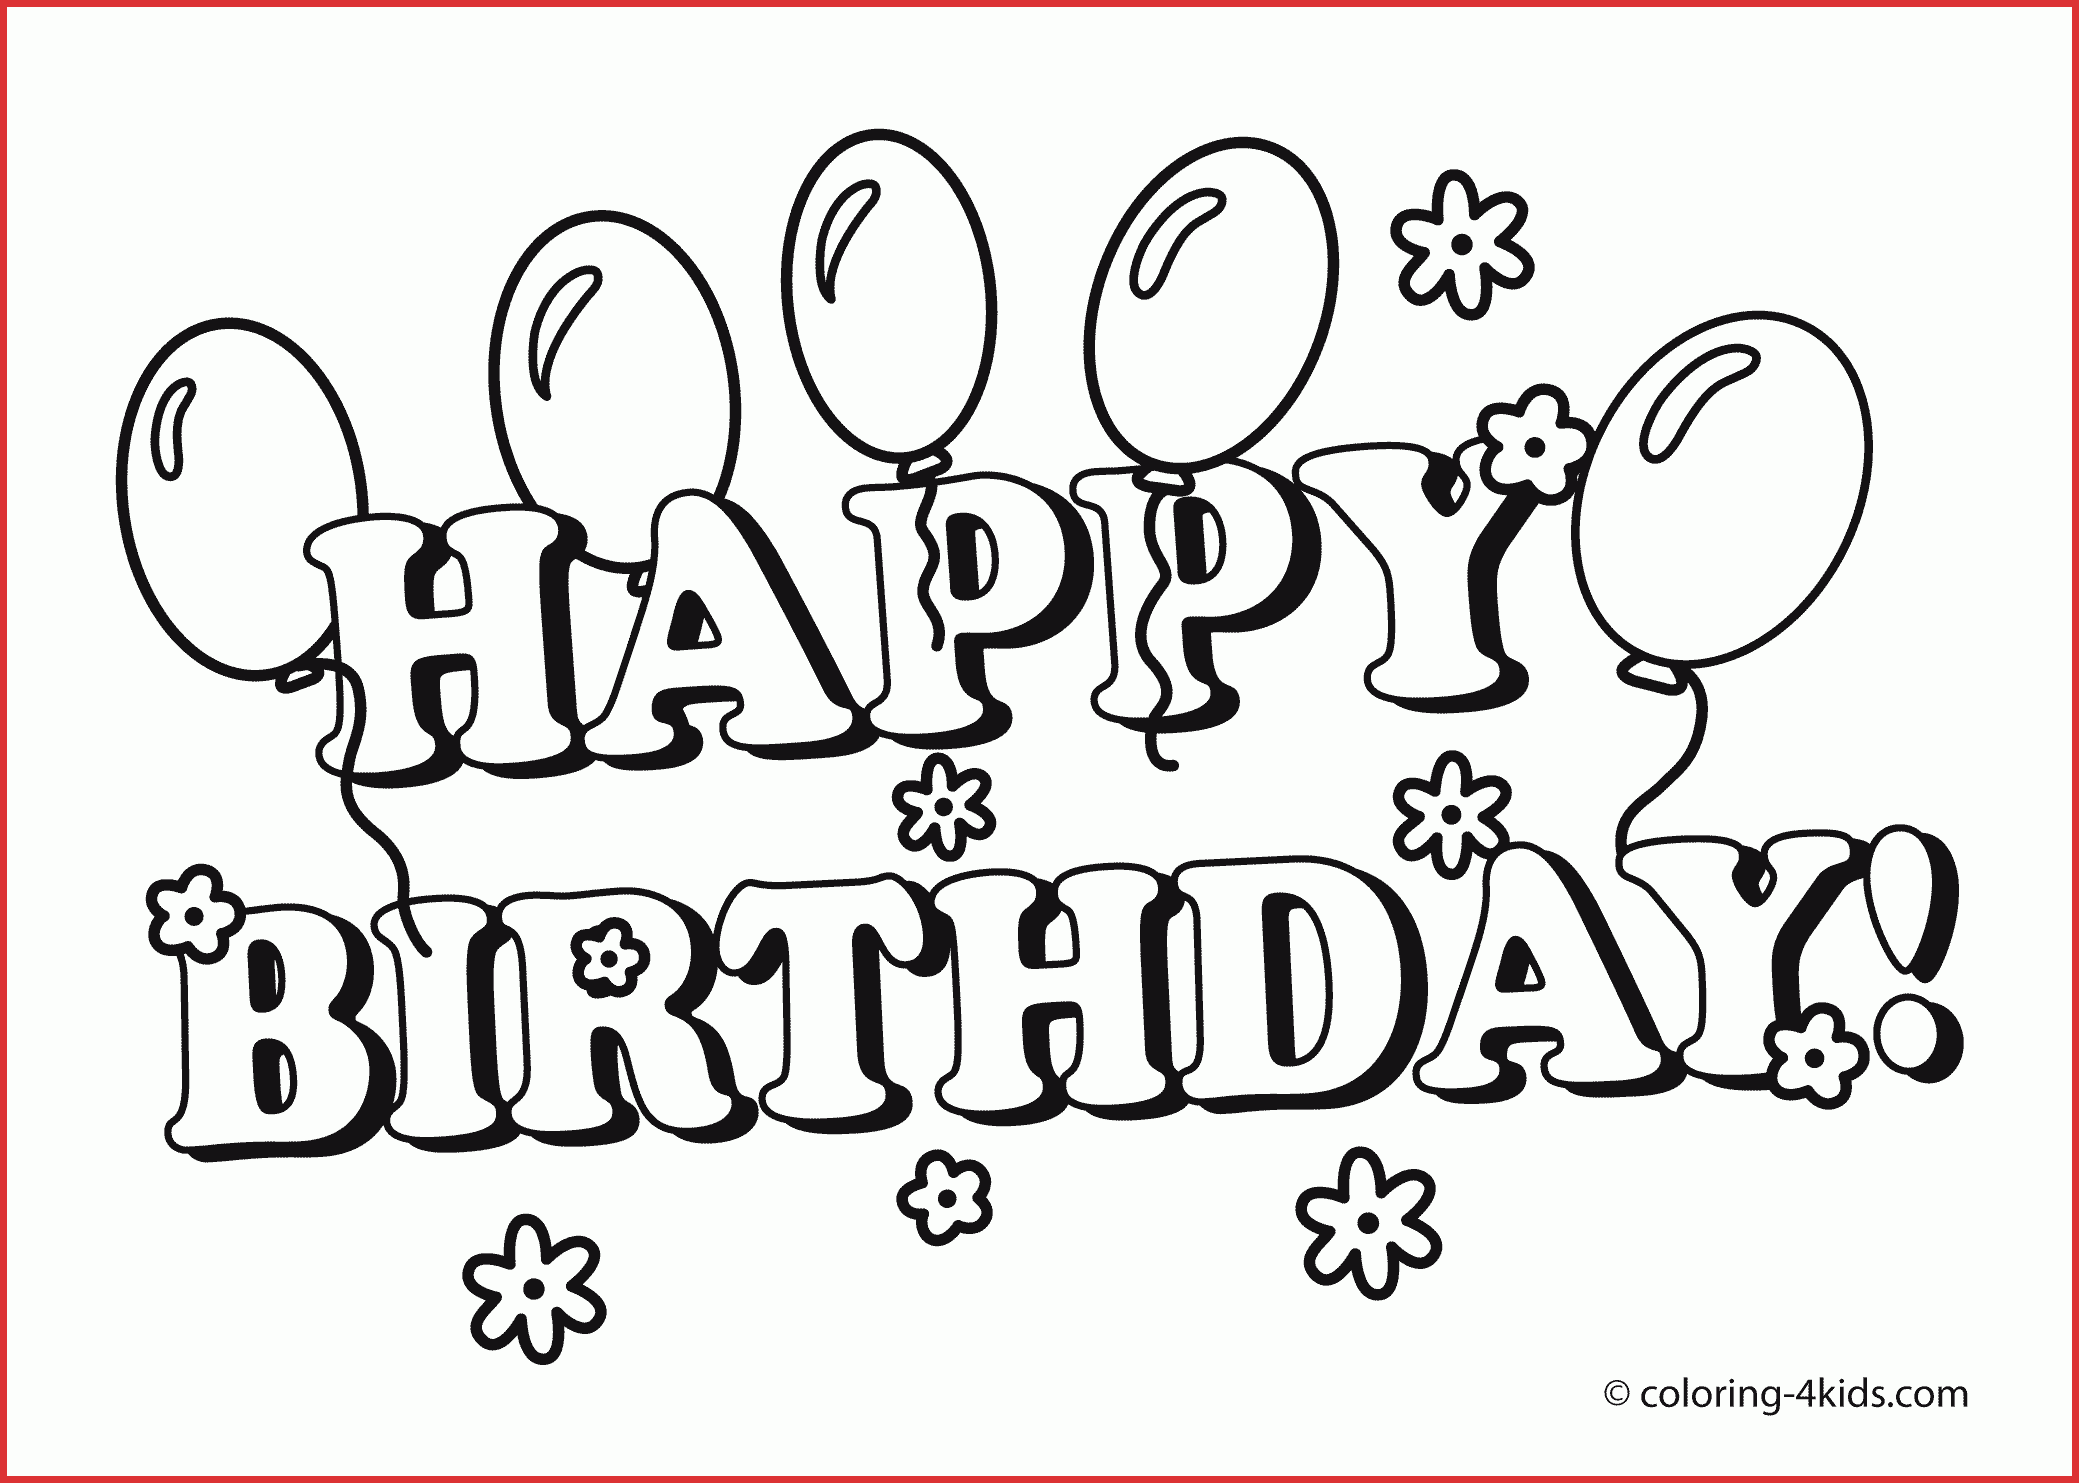 Black clipart happy birthday. Awesome resume pdf and